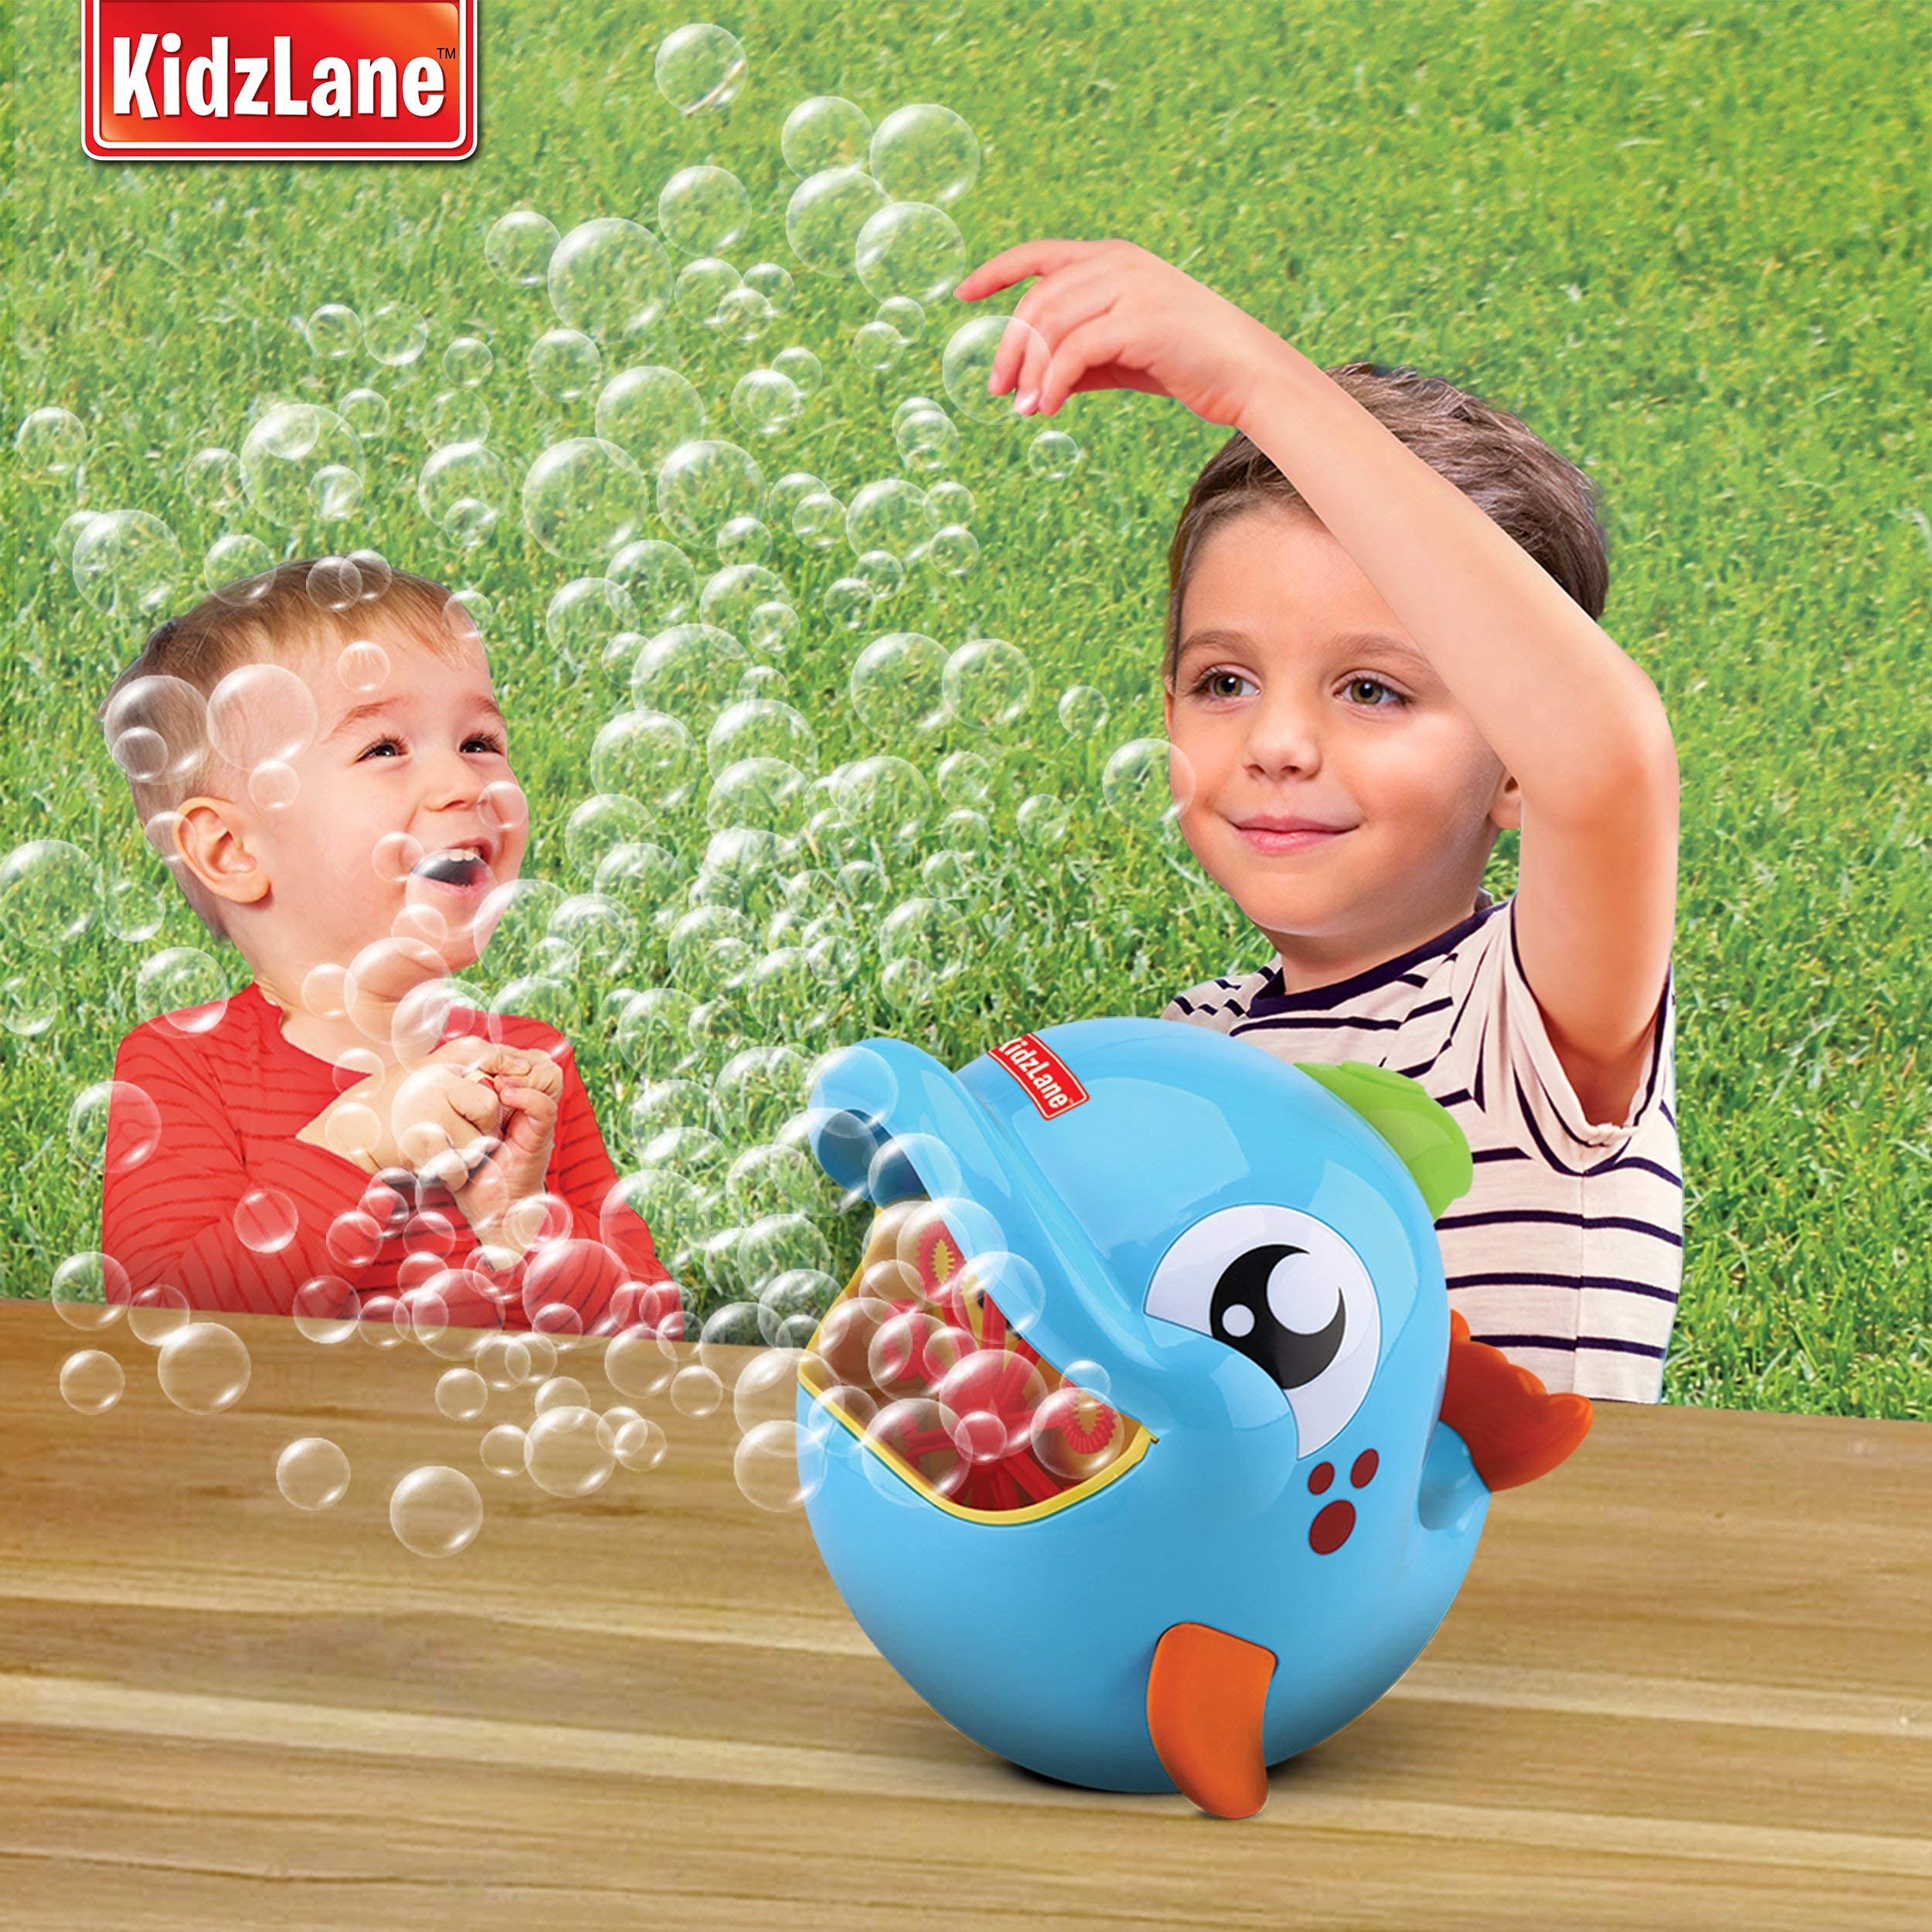 Kidzlane Bubble Maker Machine for Kids - Big Bubbles Speed Blower for Toddler's Outdoor Party Play - Makes 500 to 1000 per Minute (Bubble Dolphin)